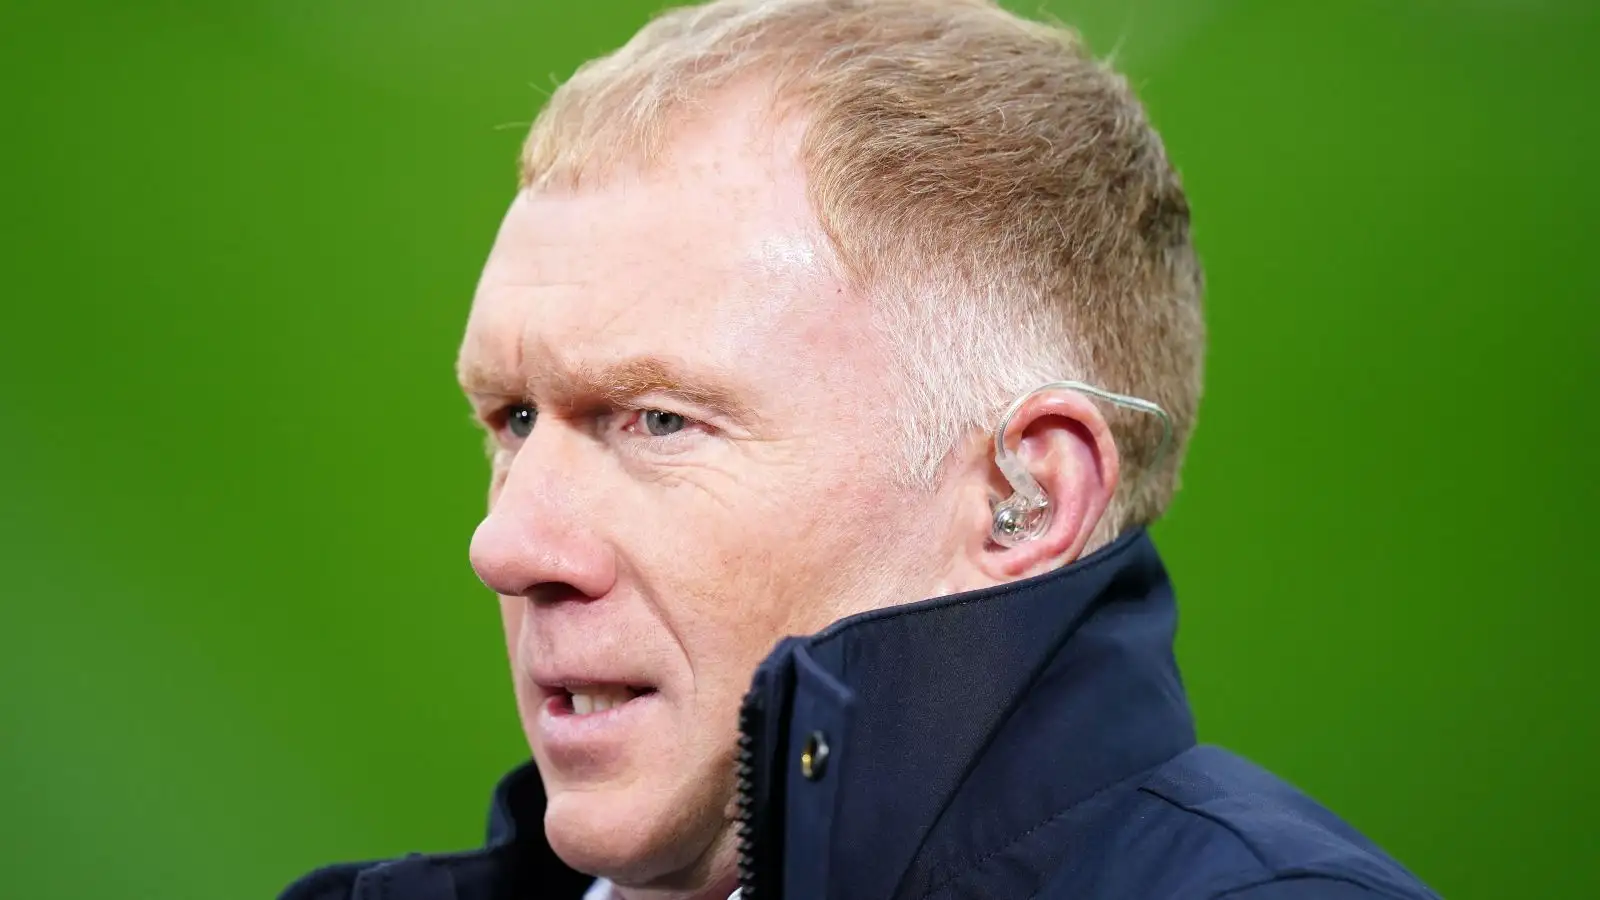 Scholes claims Ten Hag was ‘frustrated’ with Man Utd after they avoided a ‘real embarrassment’